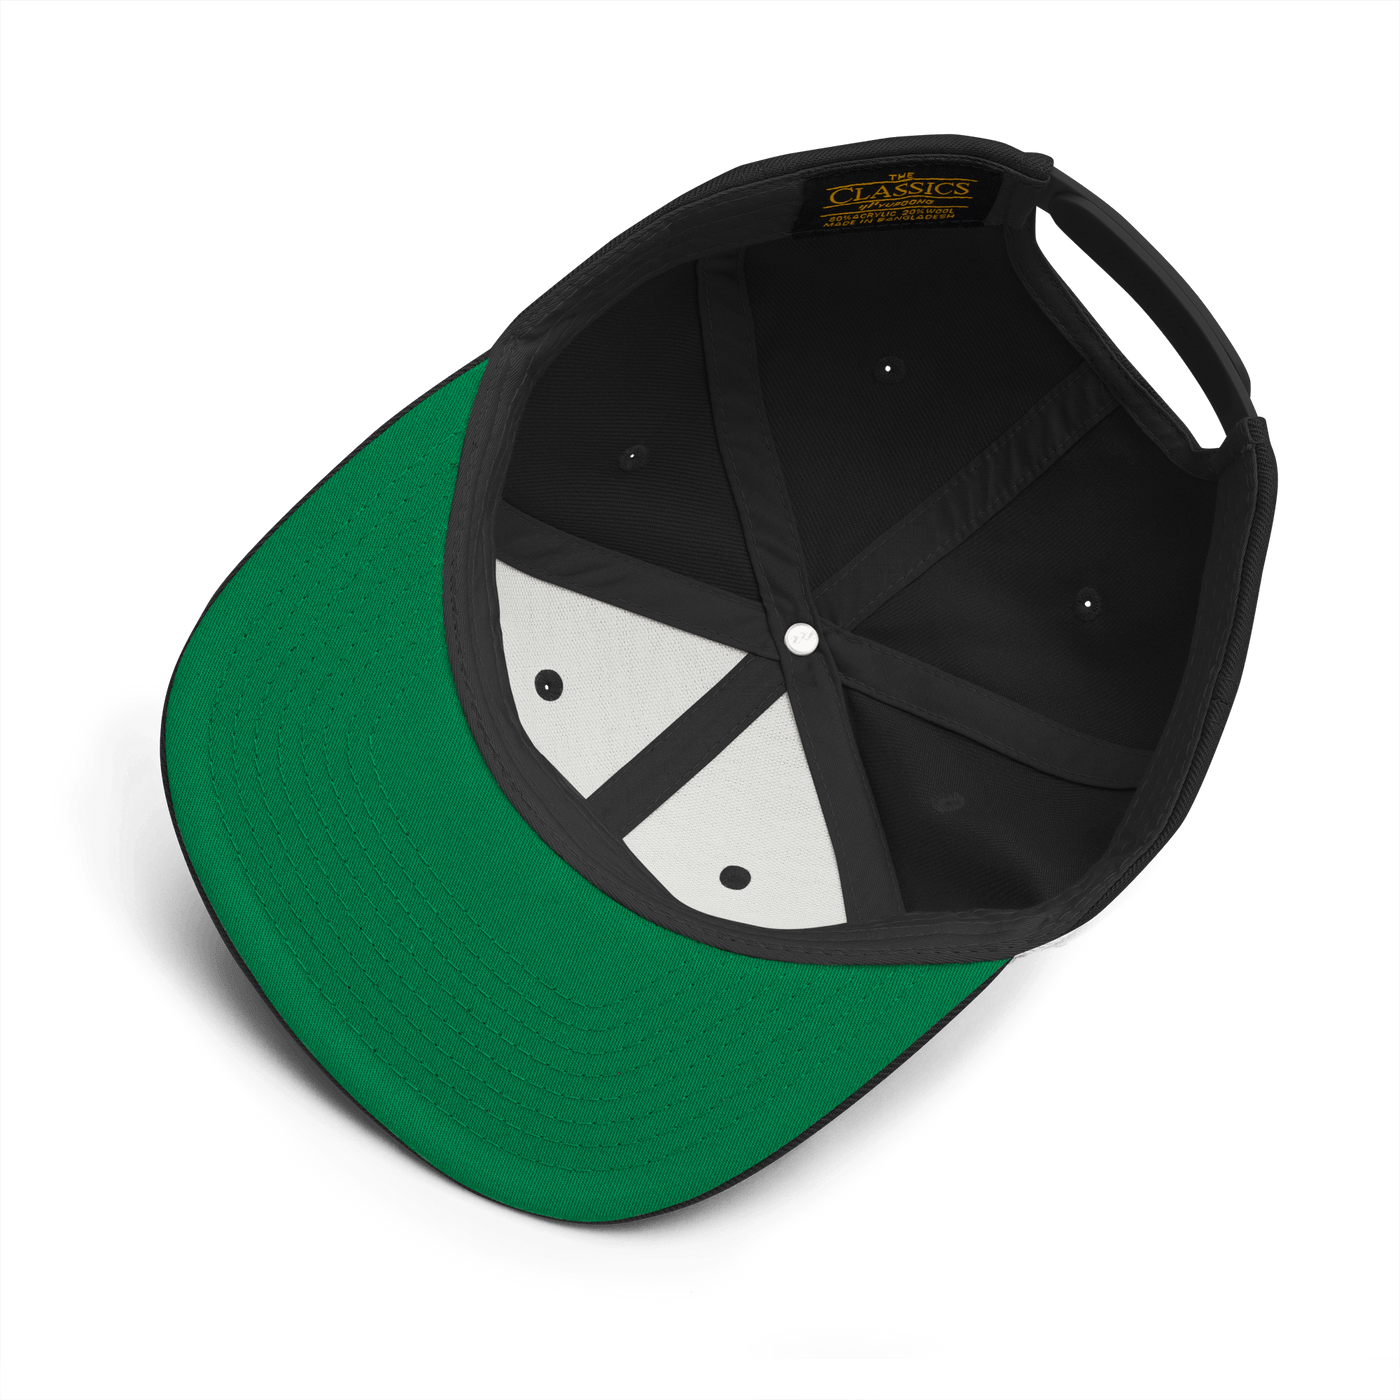 Tired dad Snapback - Black - - Just Another Cap Store